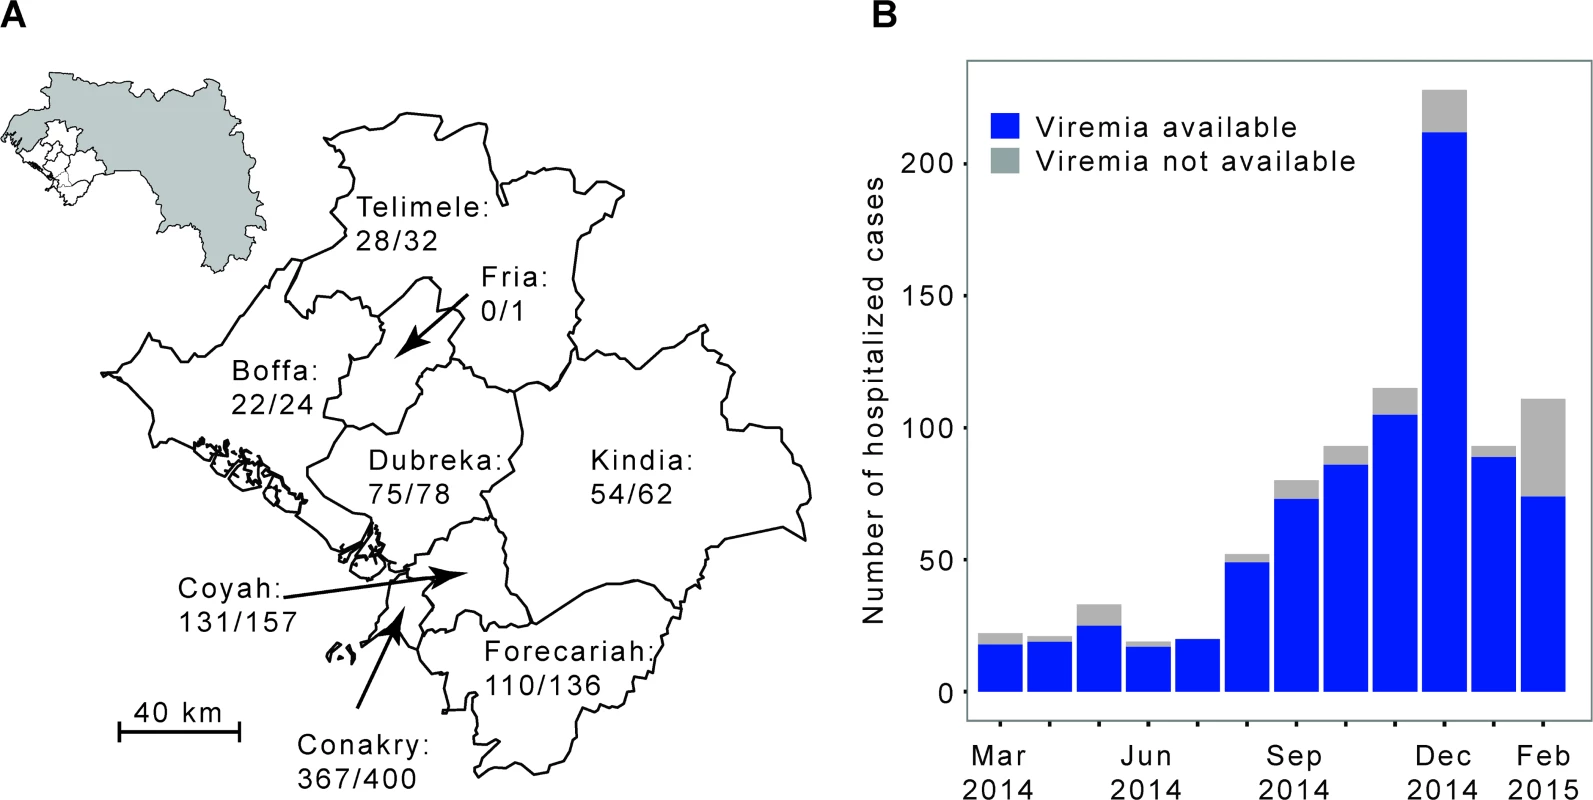 The Ebola virus disease epidemic in the Conakry area, Guinea, March 2014 to February 2015.